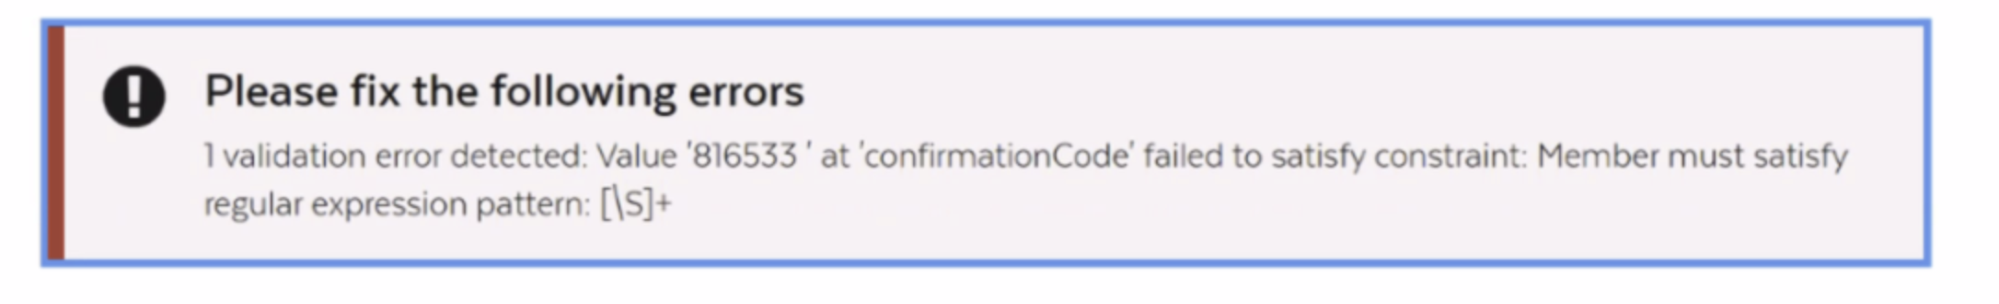 A screenshot of an error message with a string of code and jargon that isn't easily readable to the typical user.